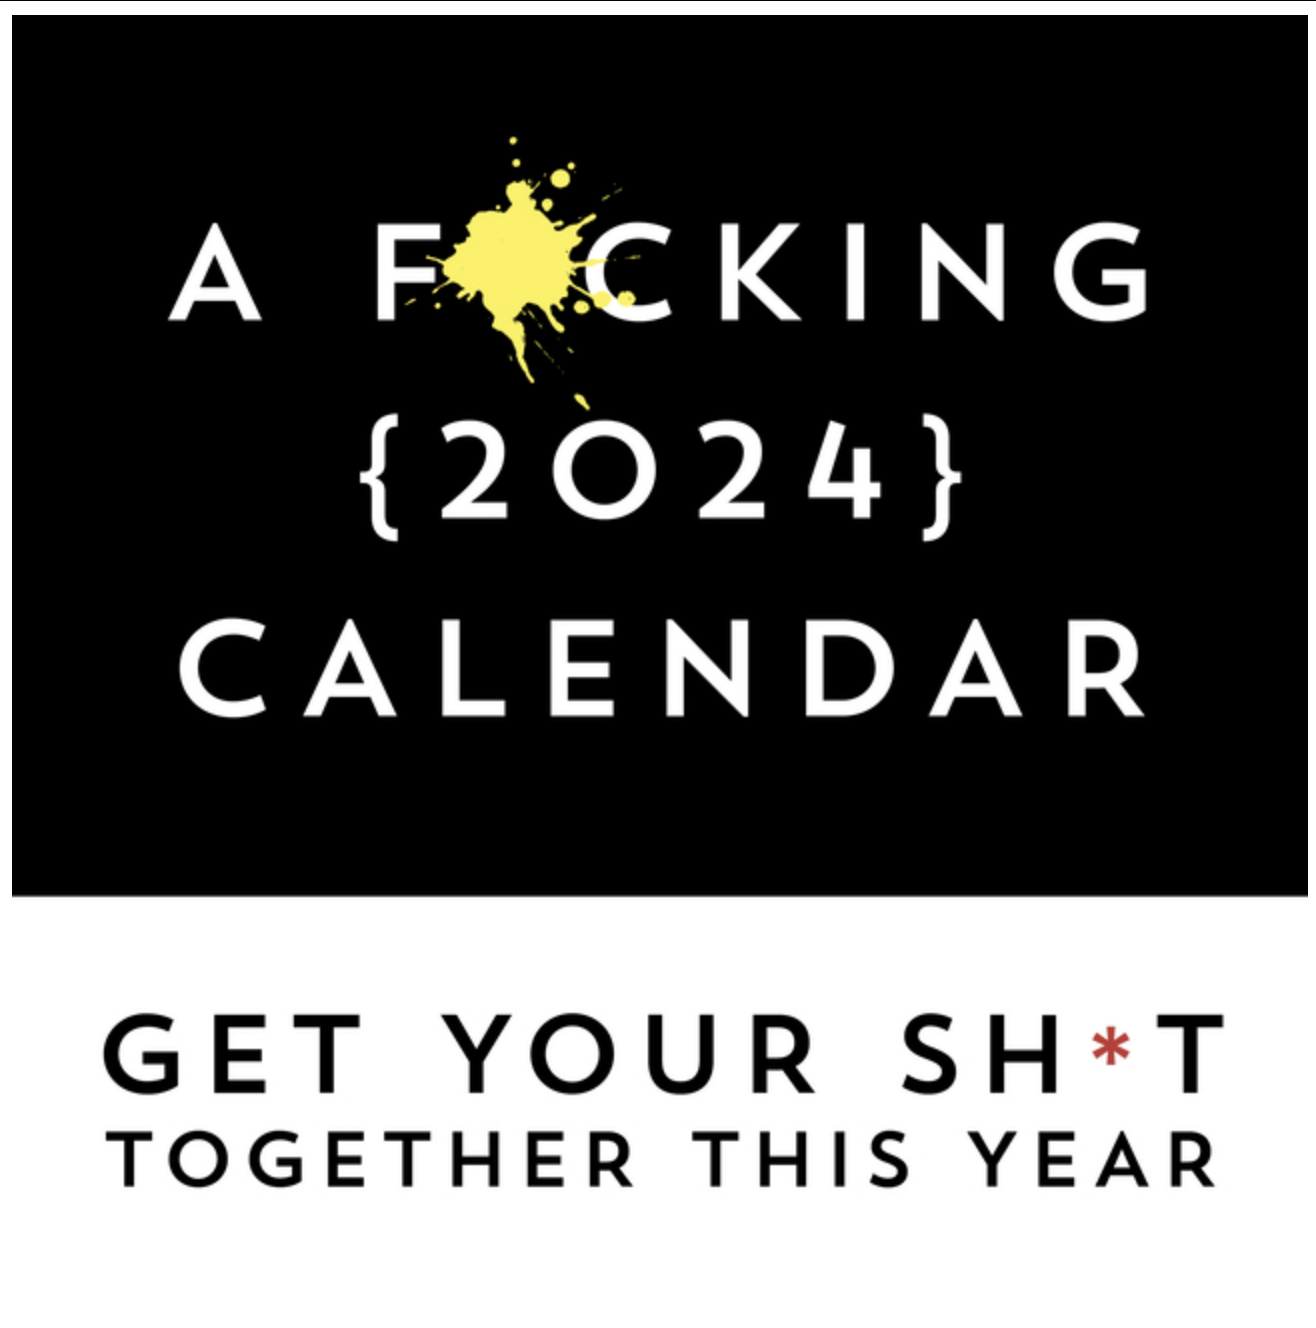 F*cking 2024 Wall Calendar Get Your Sh*t Together This Year Includes